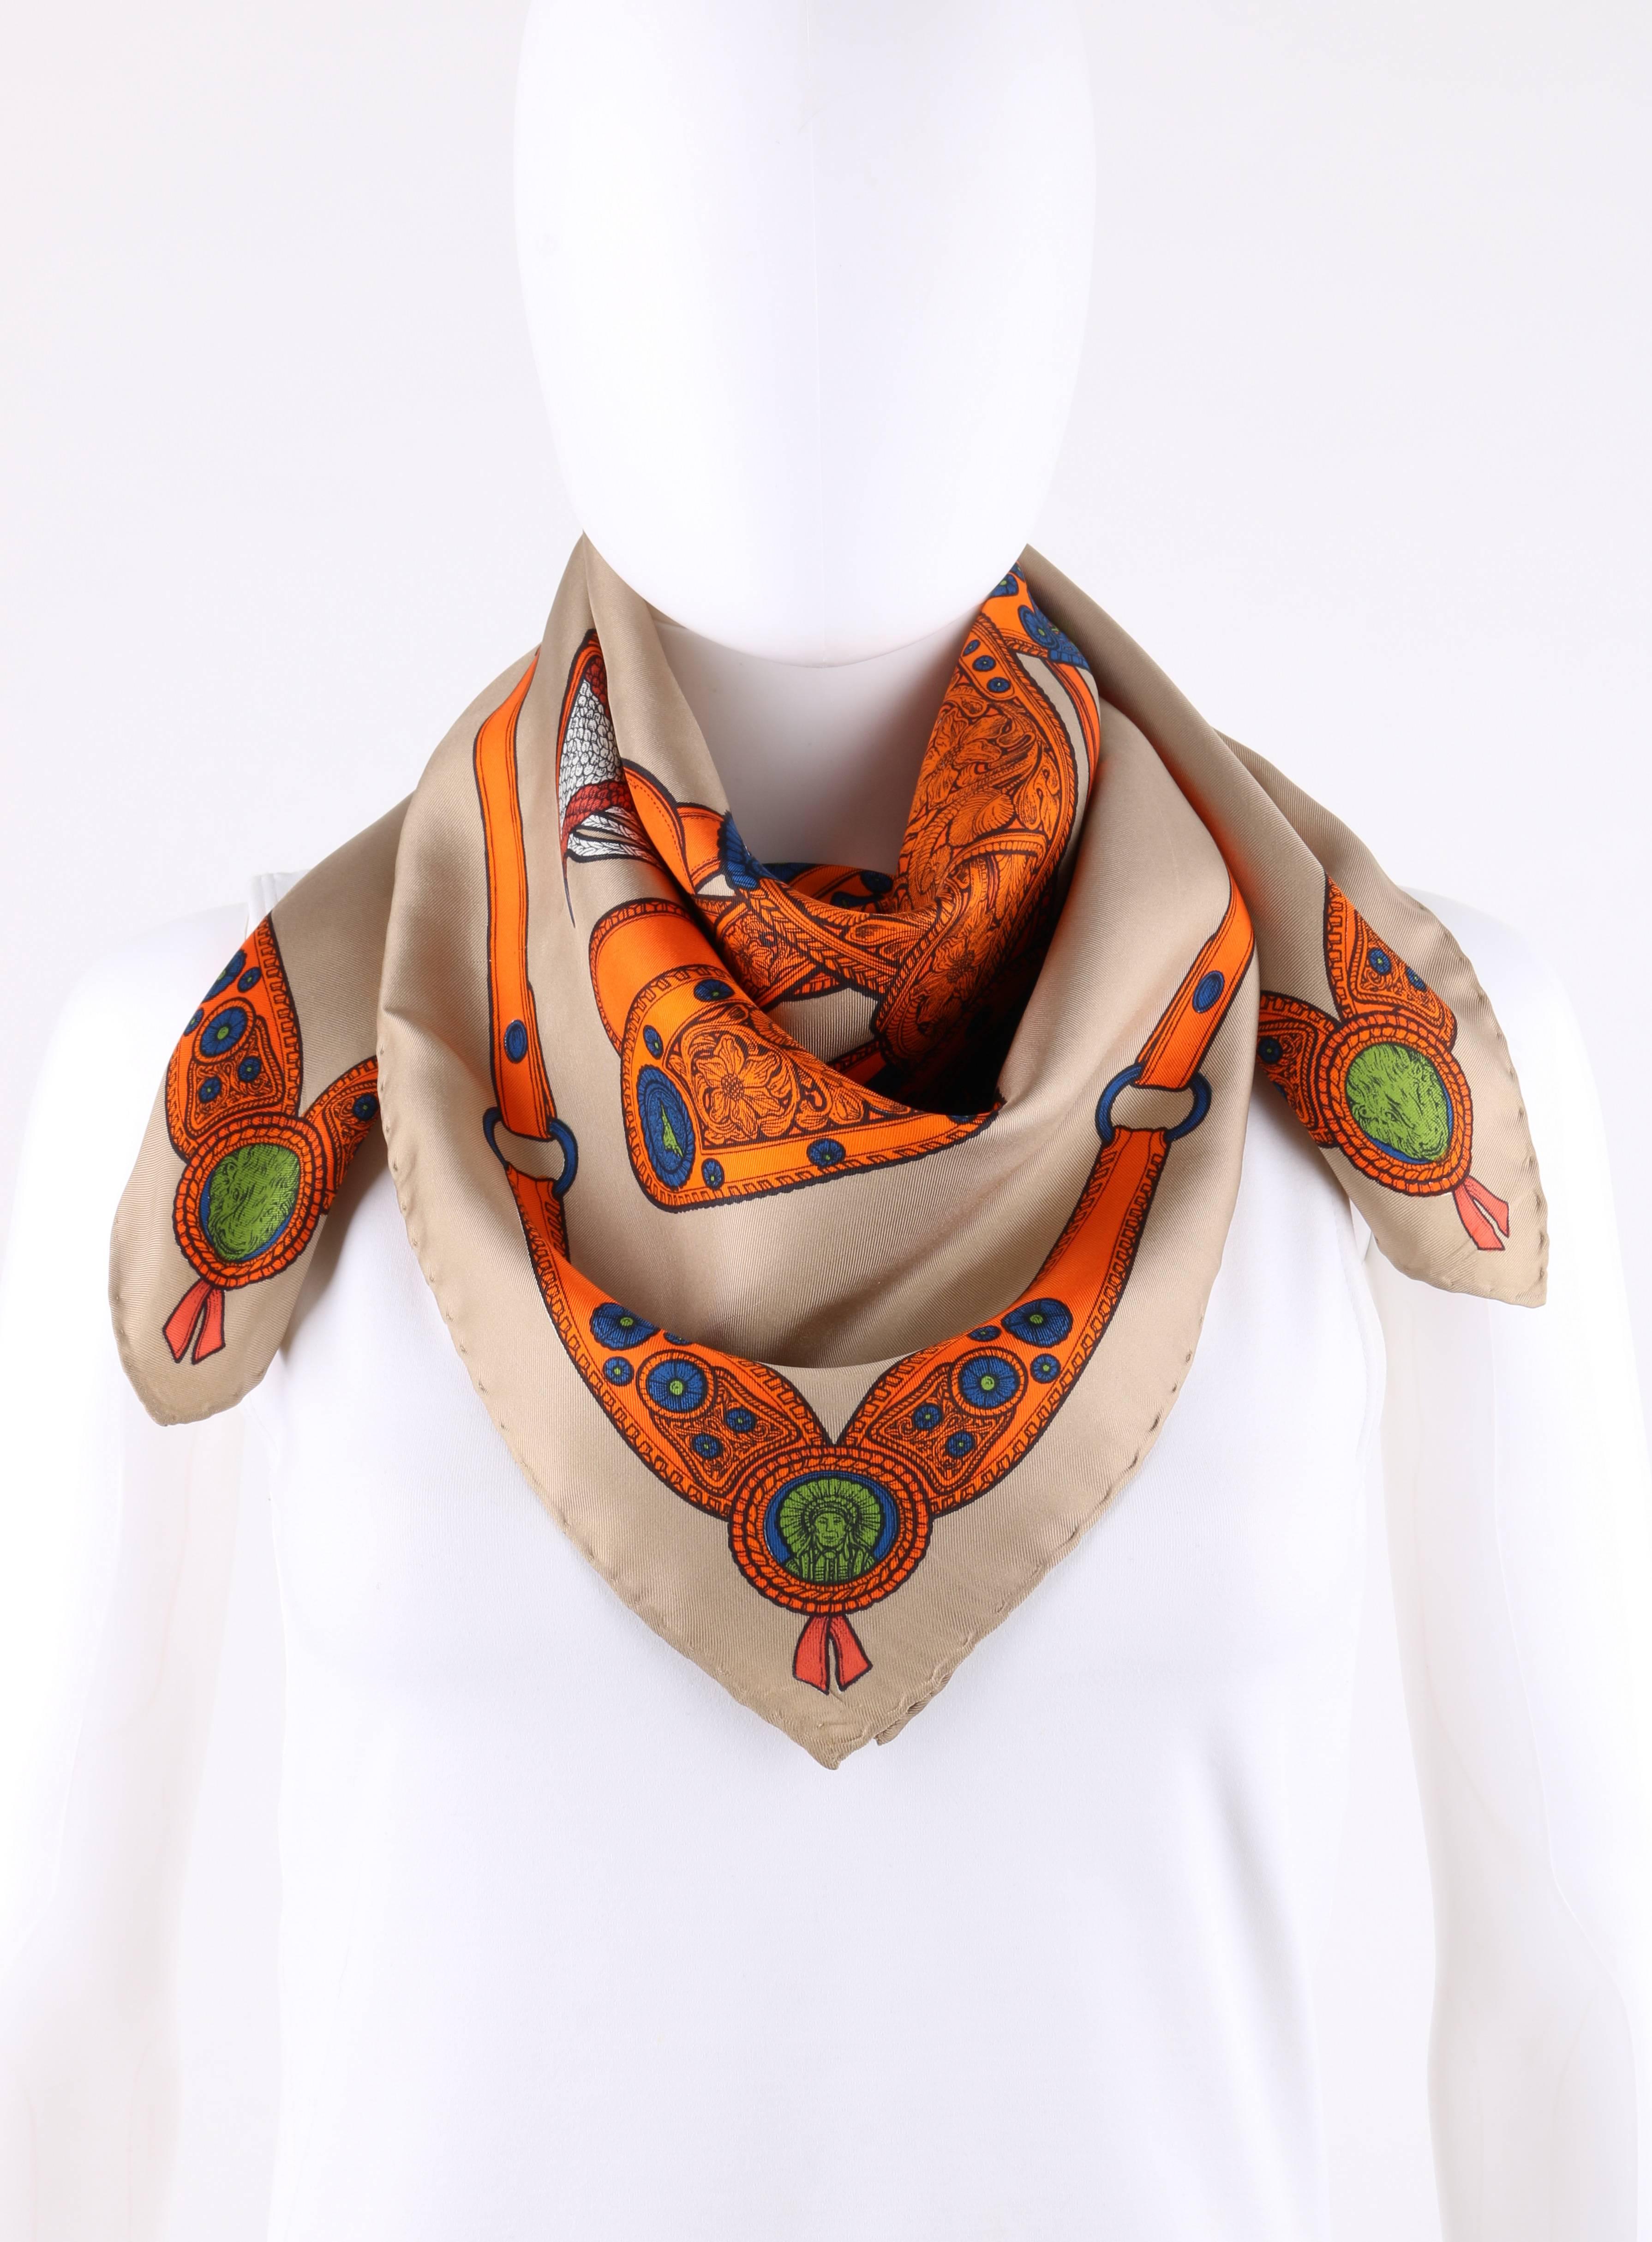 Gucci Khaki and orange southwestern saddle equestrian print silk scarf. Khaki background. Orange, royal blue, and green central saddle with ornate floral and southwestern detail throughout. Southwestern style belt boarder with buffalo and chief